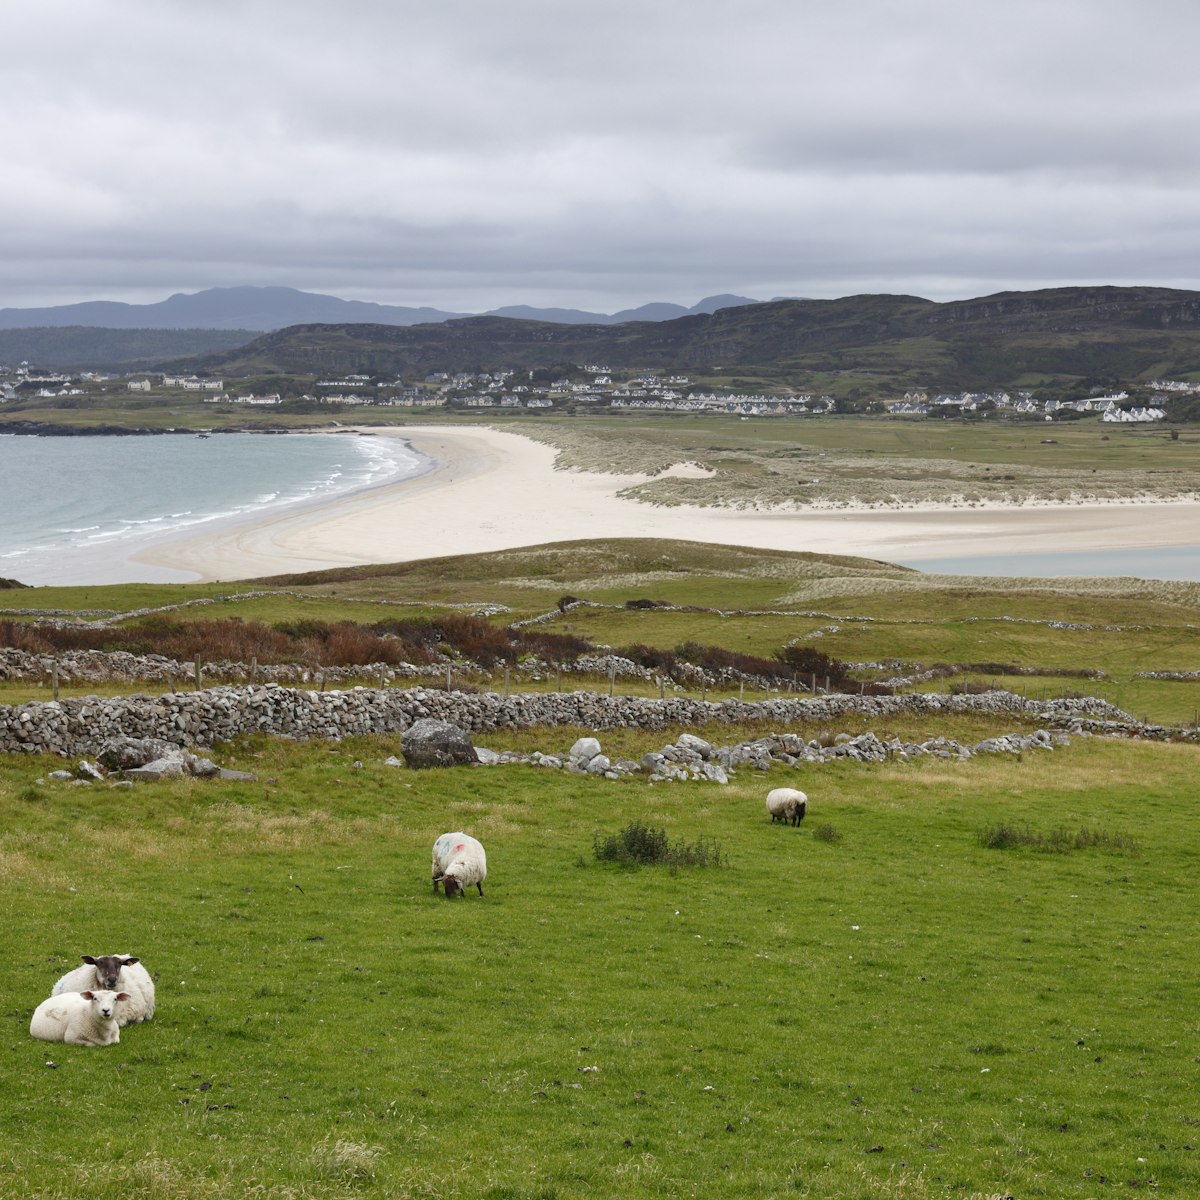 Sheep in a field by the coast at Horn Head near Dunfanaghy.